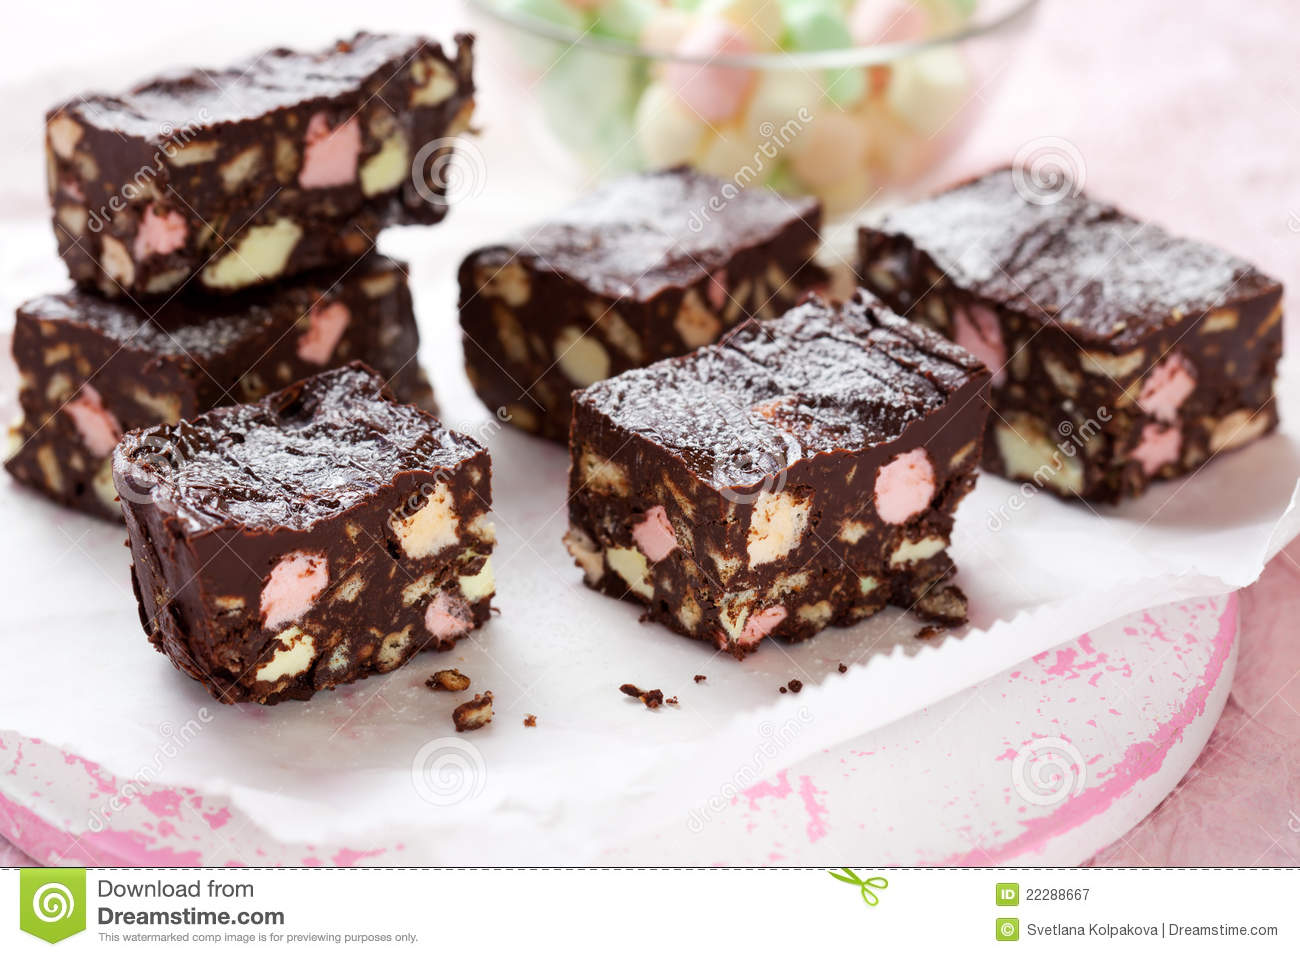 Rocky Road Cake Royalty Free Stock Photography   Image  22288667